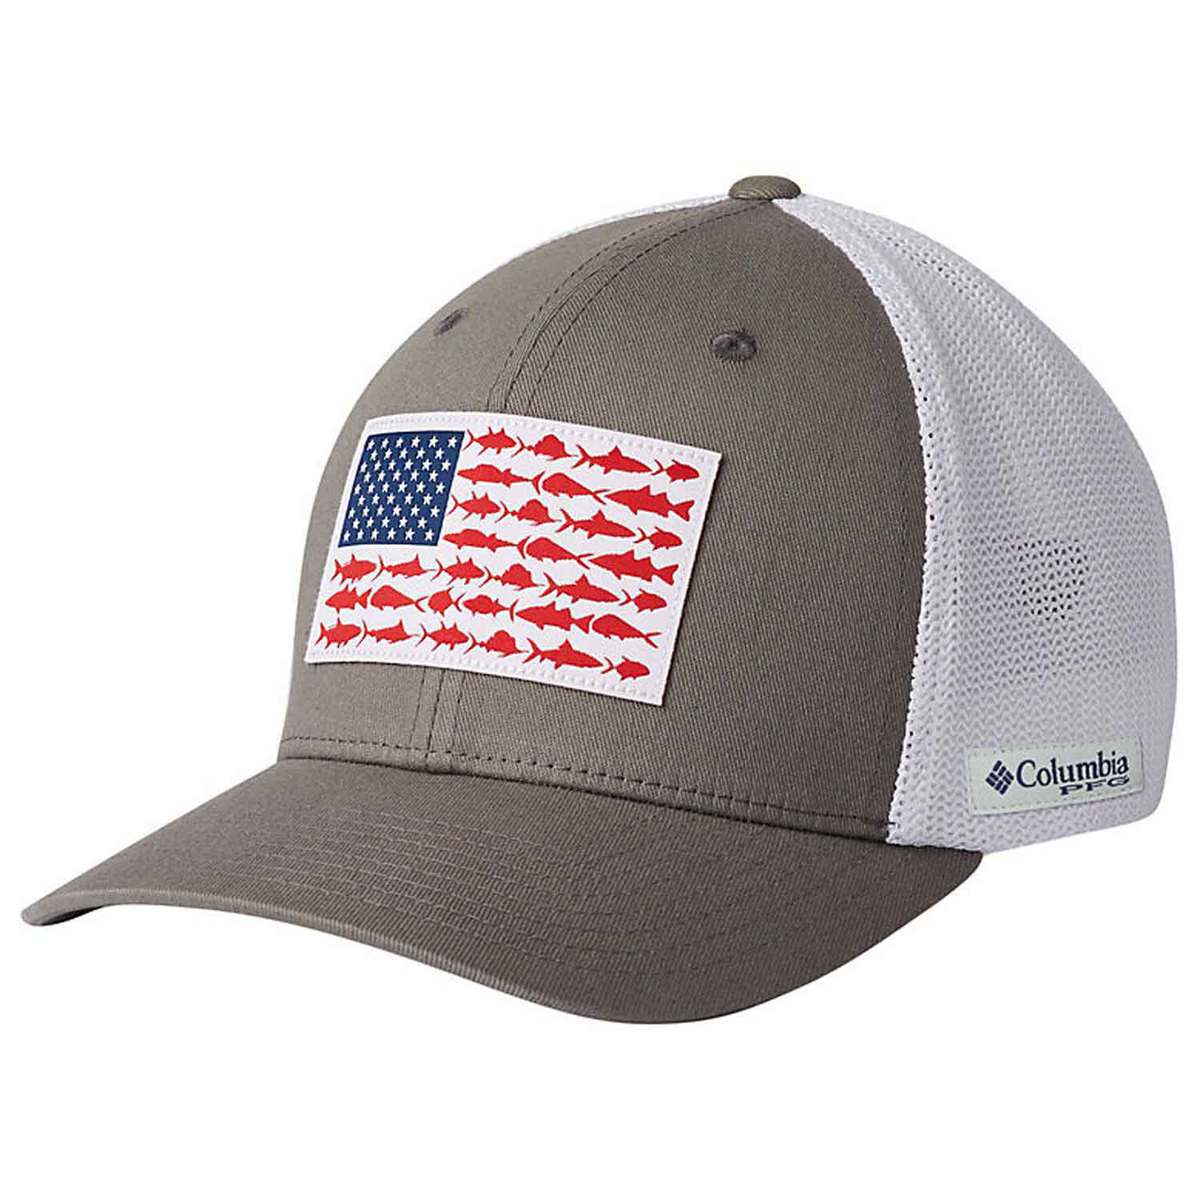 Quality Columbia Fishing Hat Cotton Polyester Outdoor sport cap